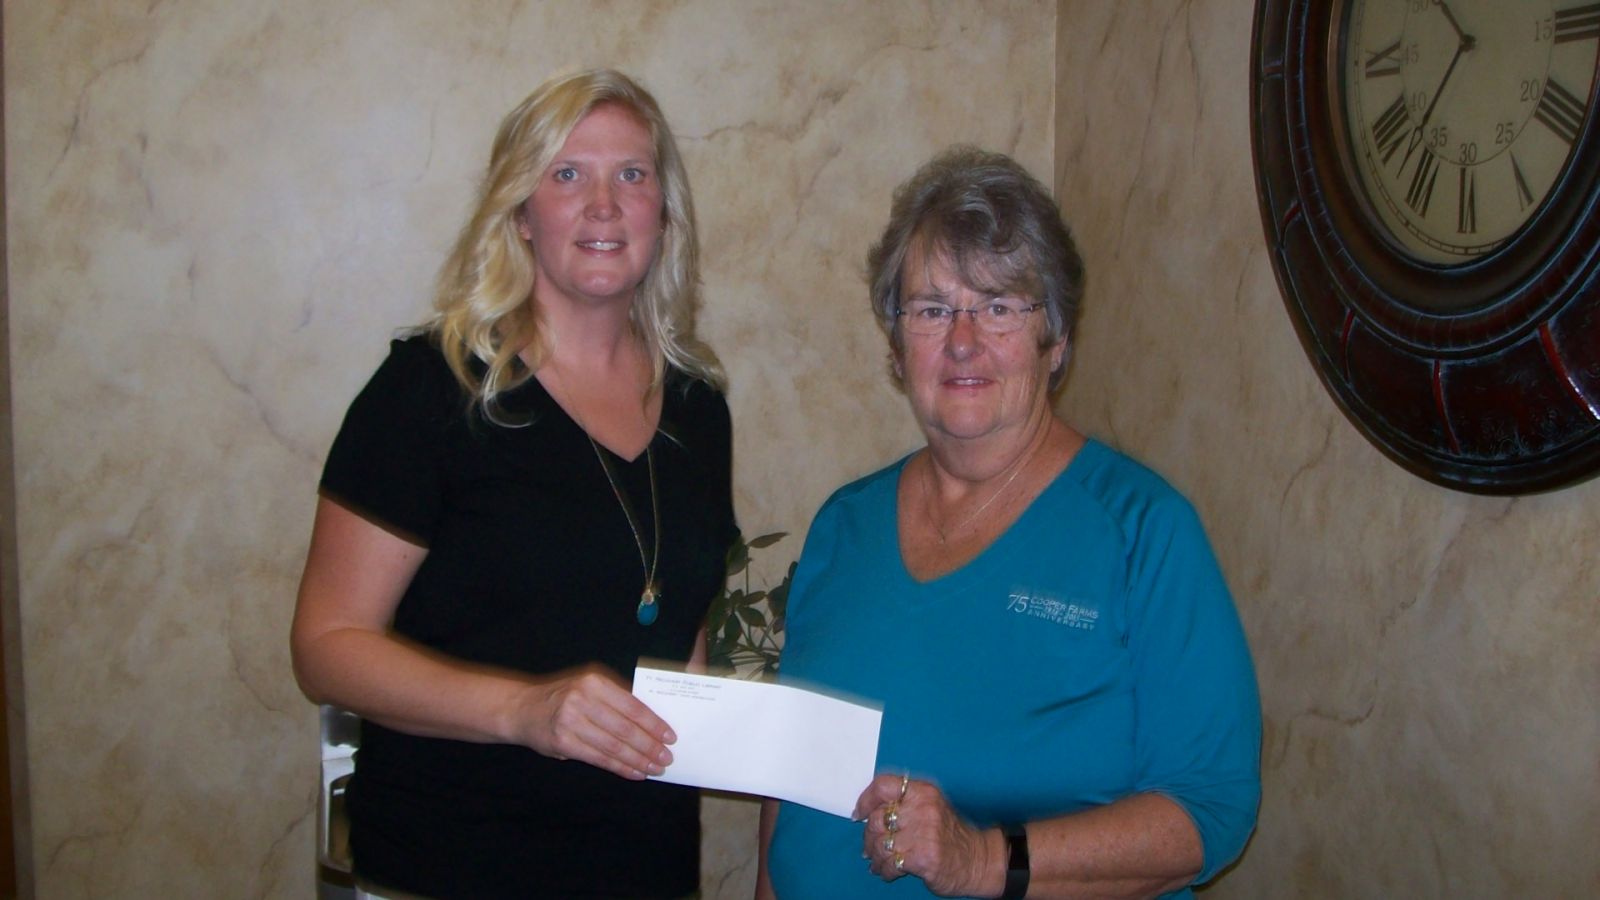 Library fiscal officer accepts check donation